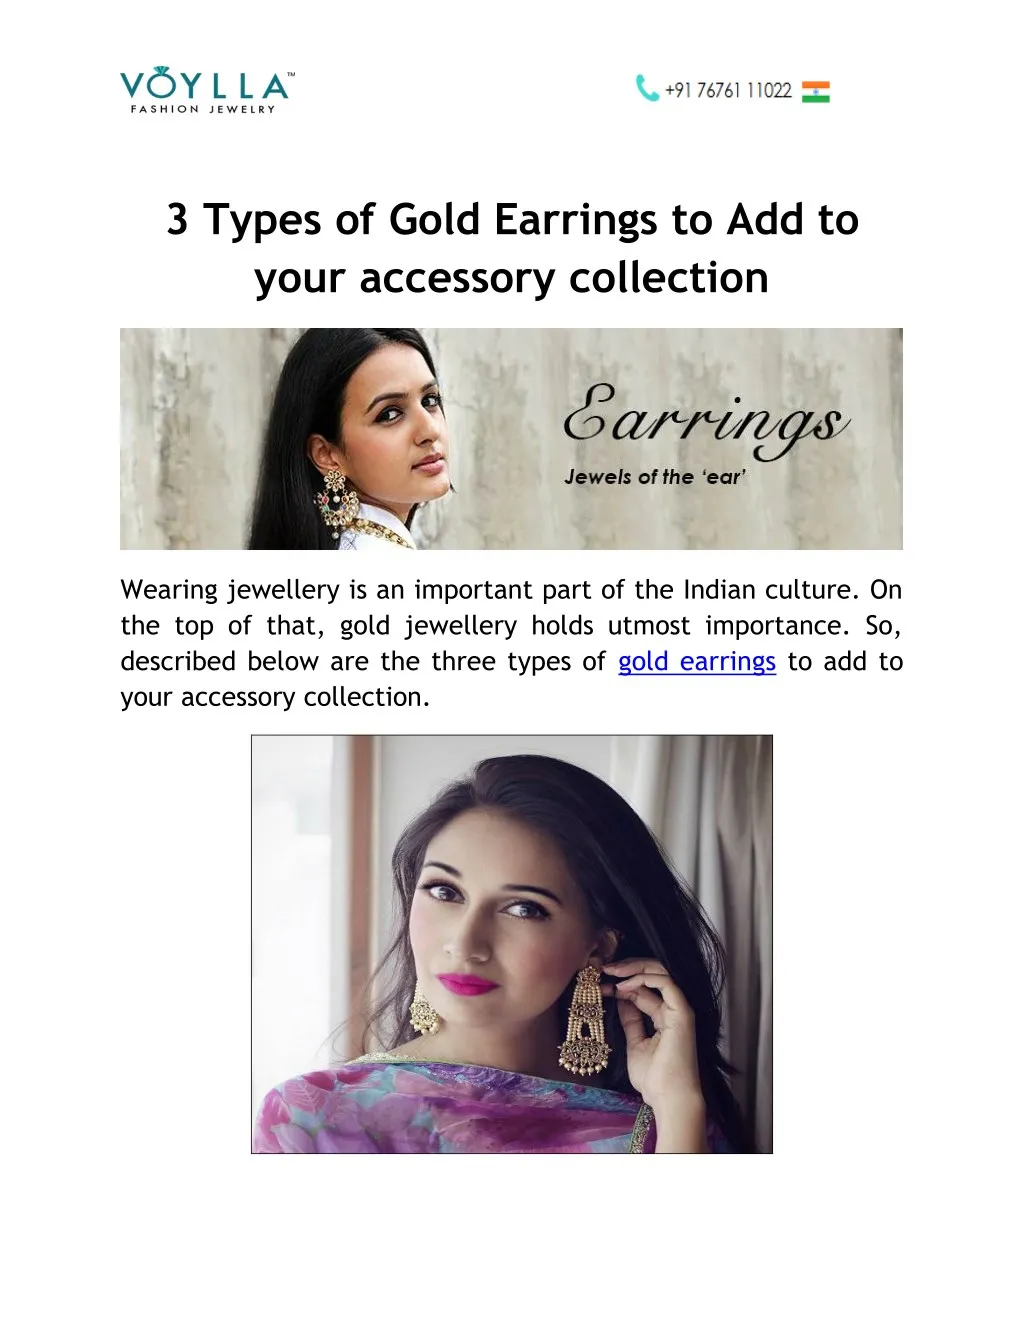 3 types of gold earrings to add to your accessory